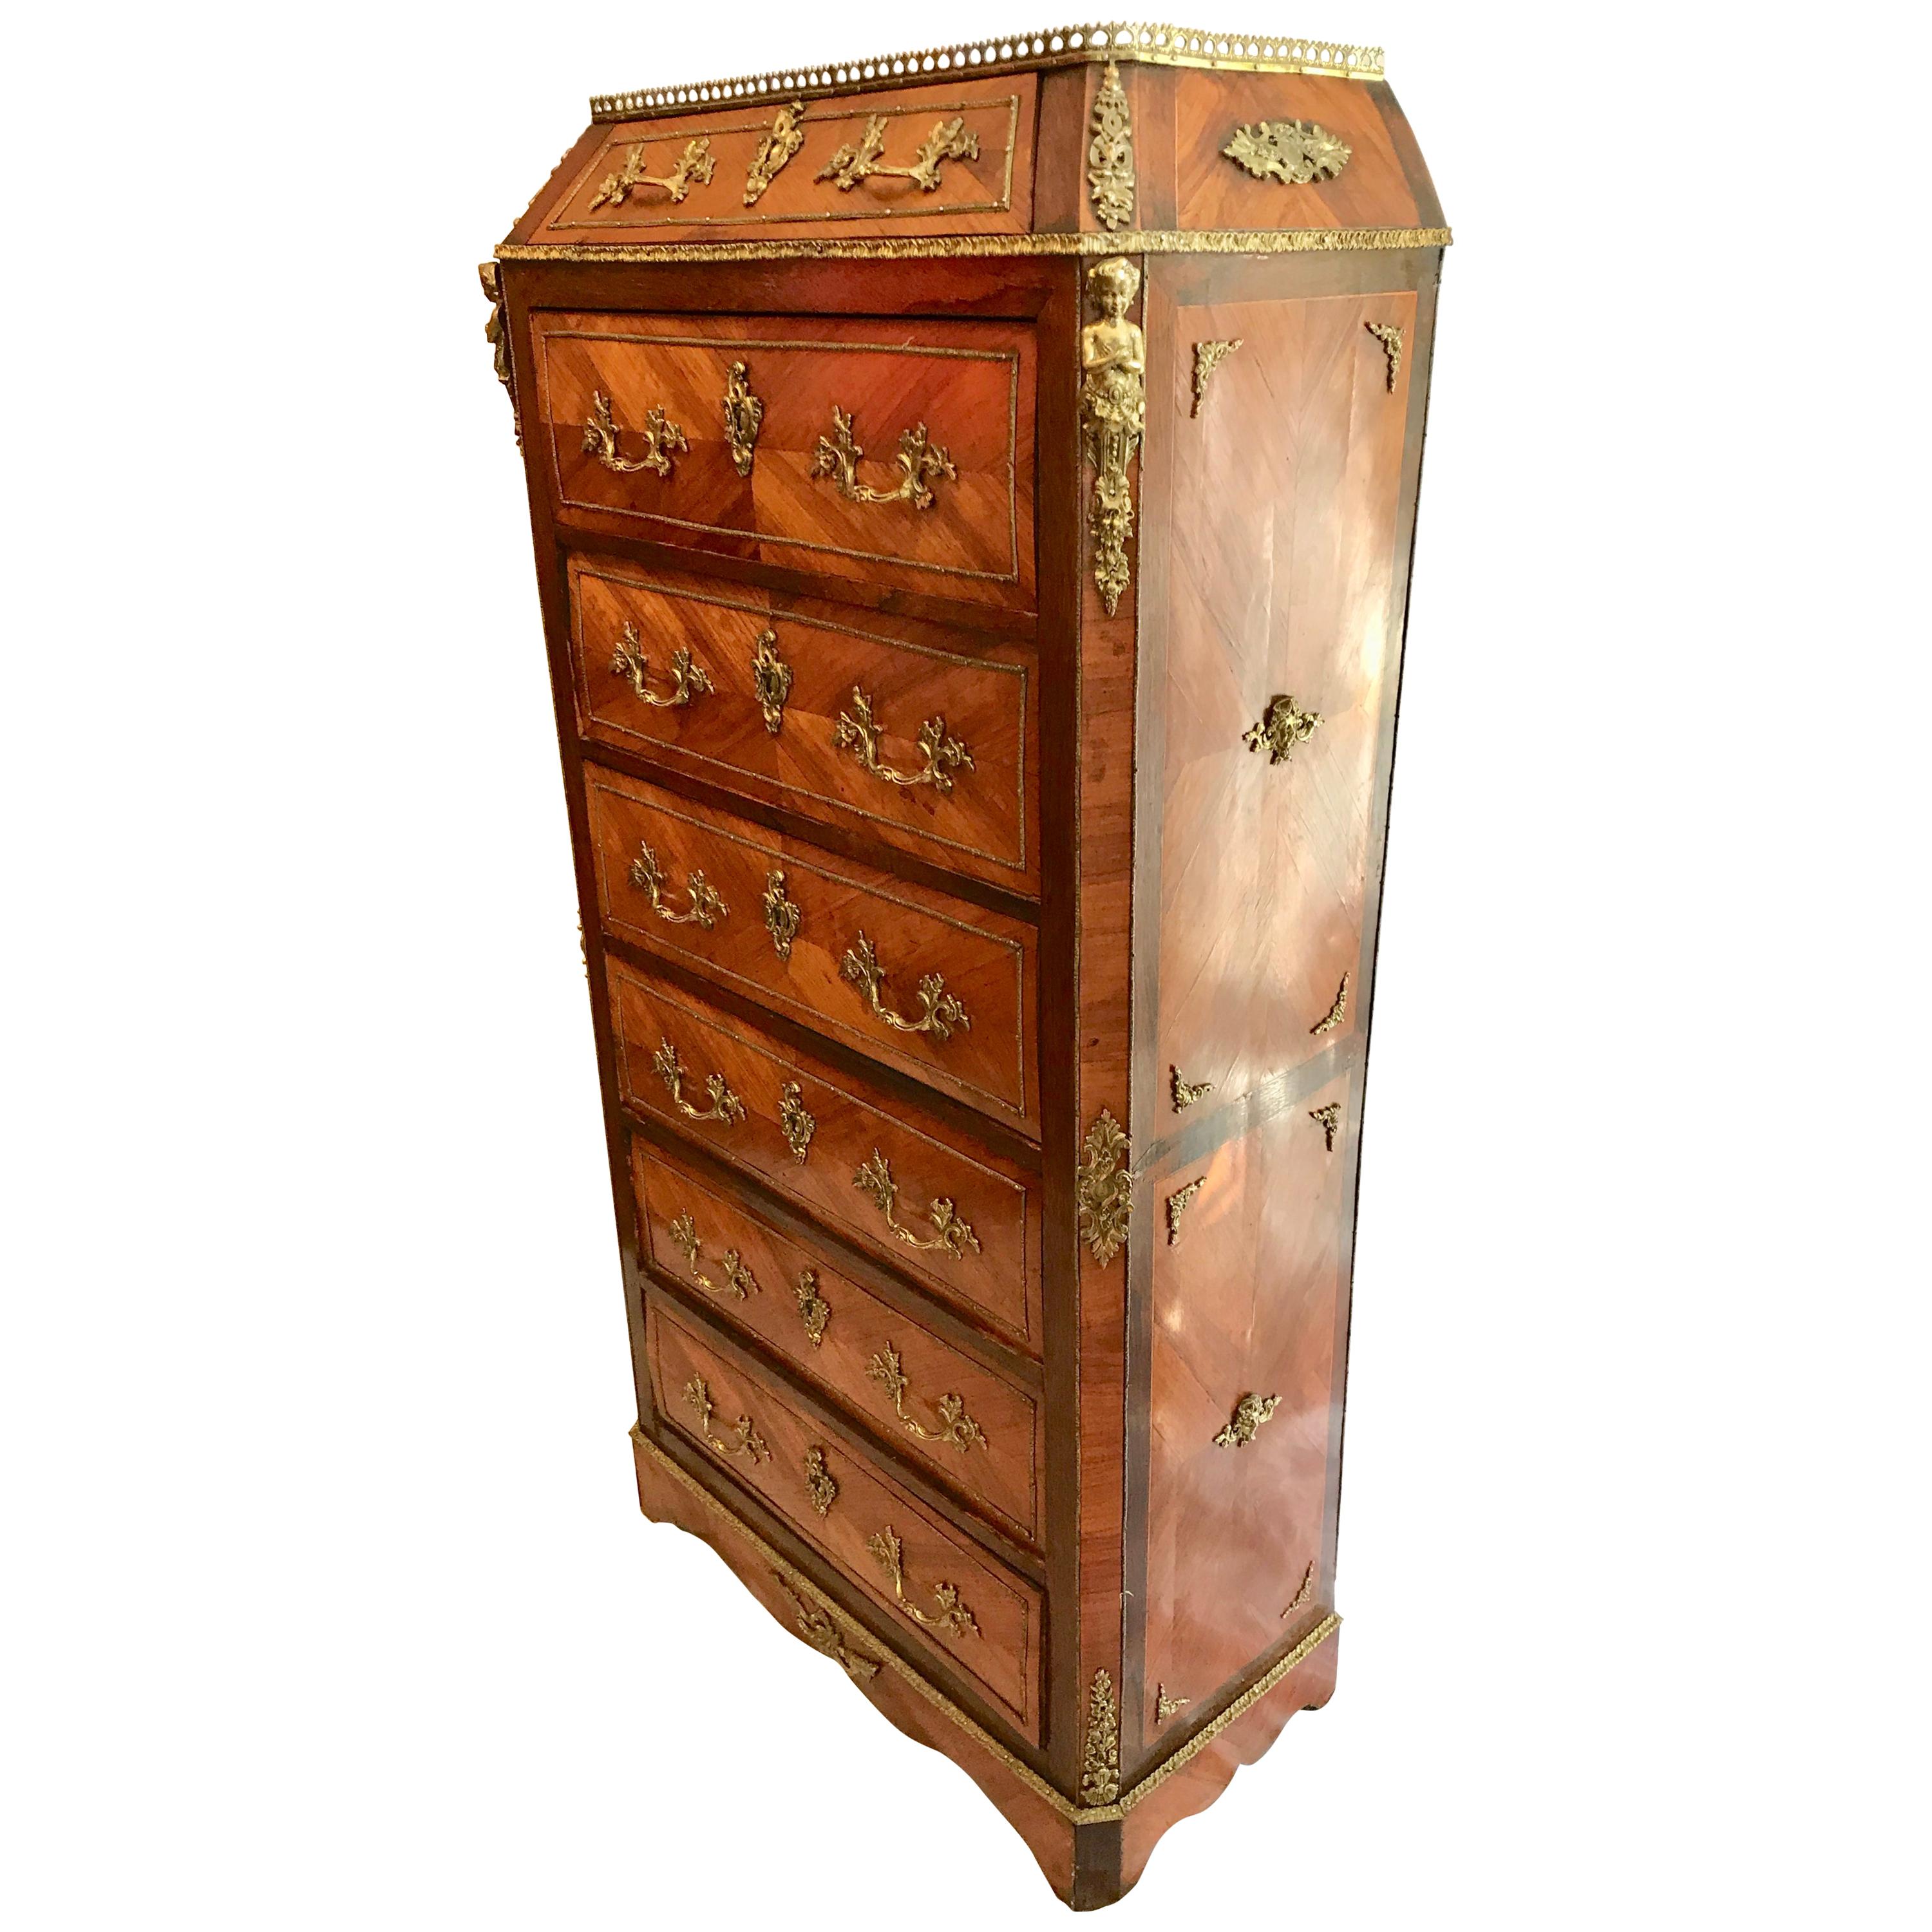 19th Century Louis XV Style Ormolu-Mounted Kingwood Lingerie Chest